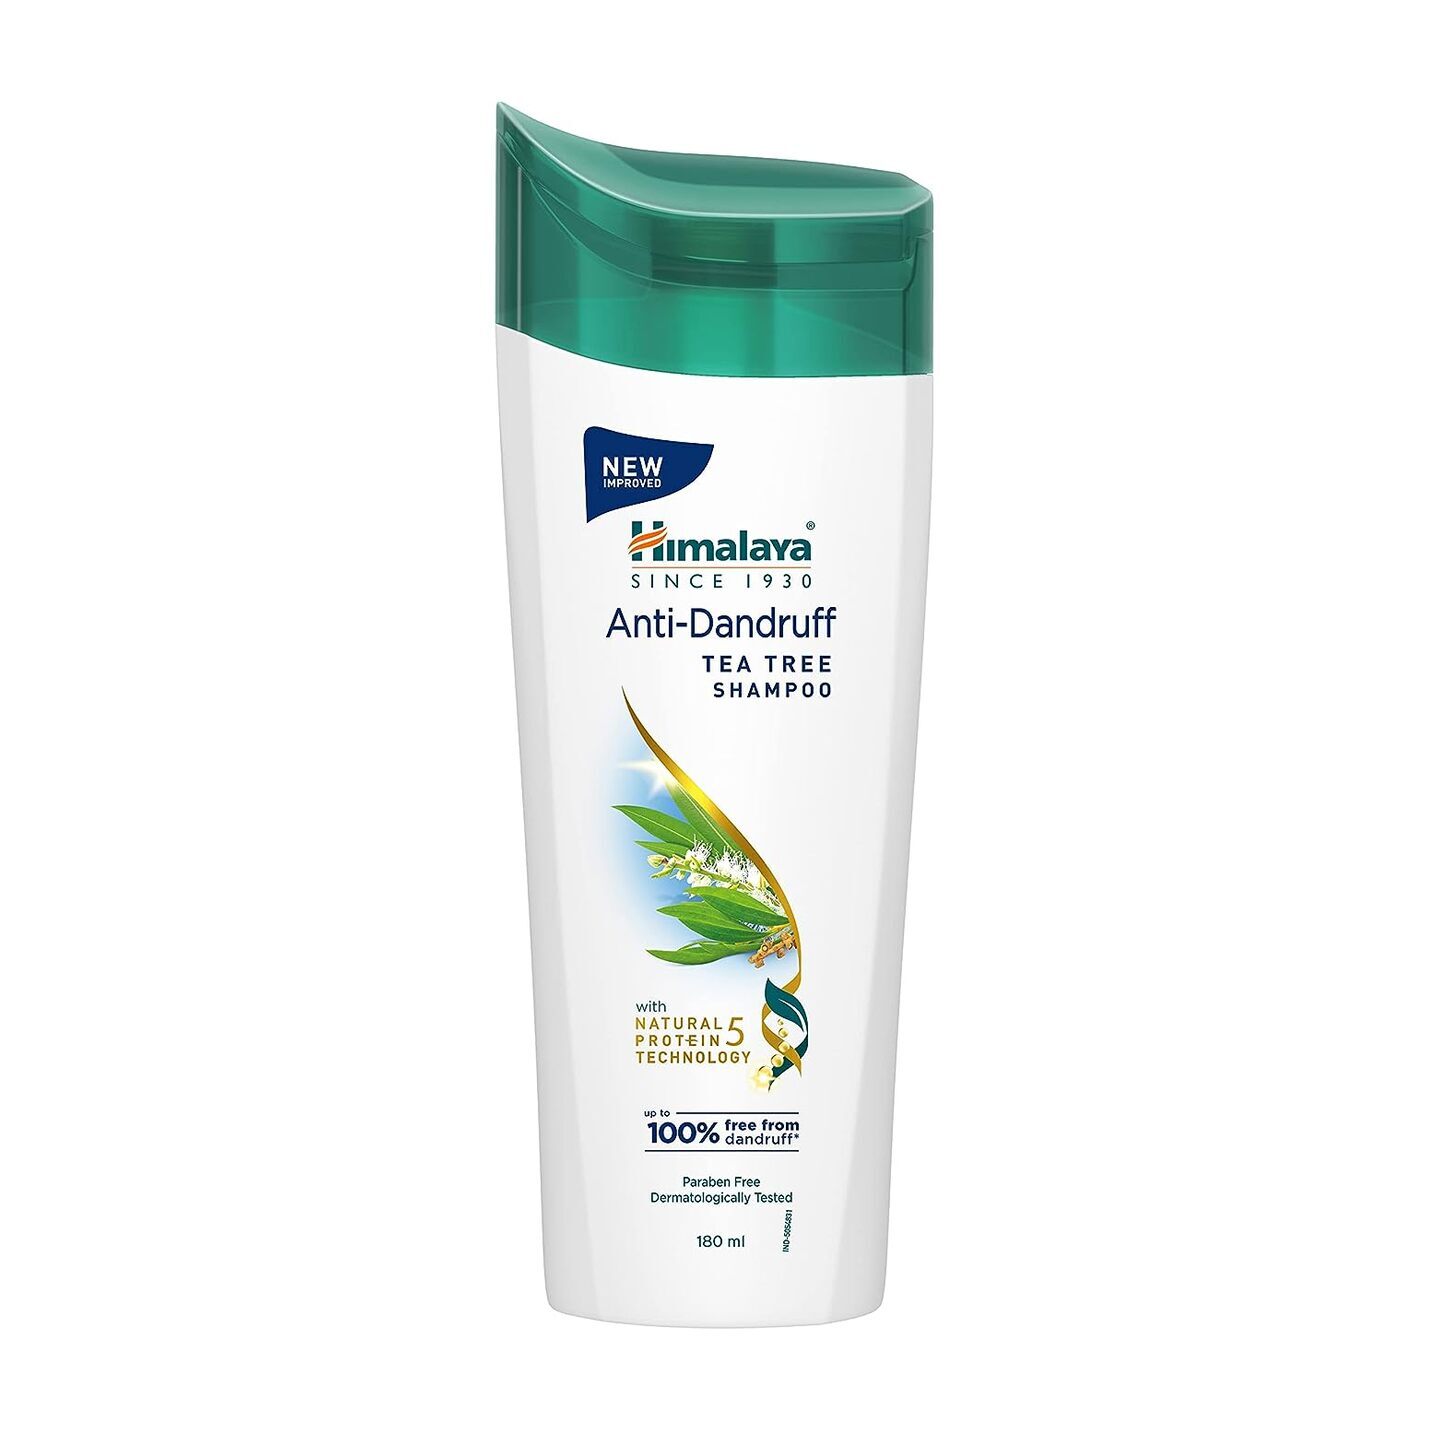 Himalaya Anti-Dandruff Tea Tree Shampoo, Removes up to 100 Dandruff, Soothes Scalp & Nourishes Hair, with Tea Tree oil and Aloe Vera, for men and women, 180ml